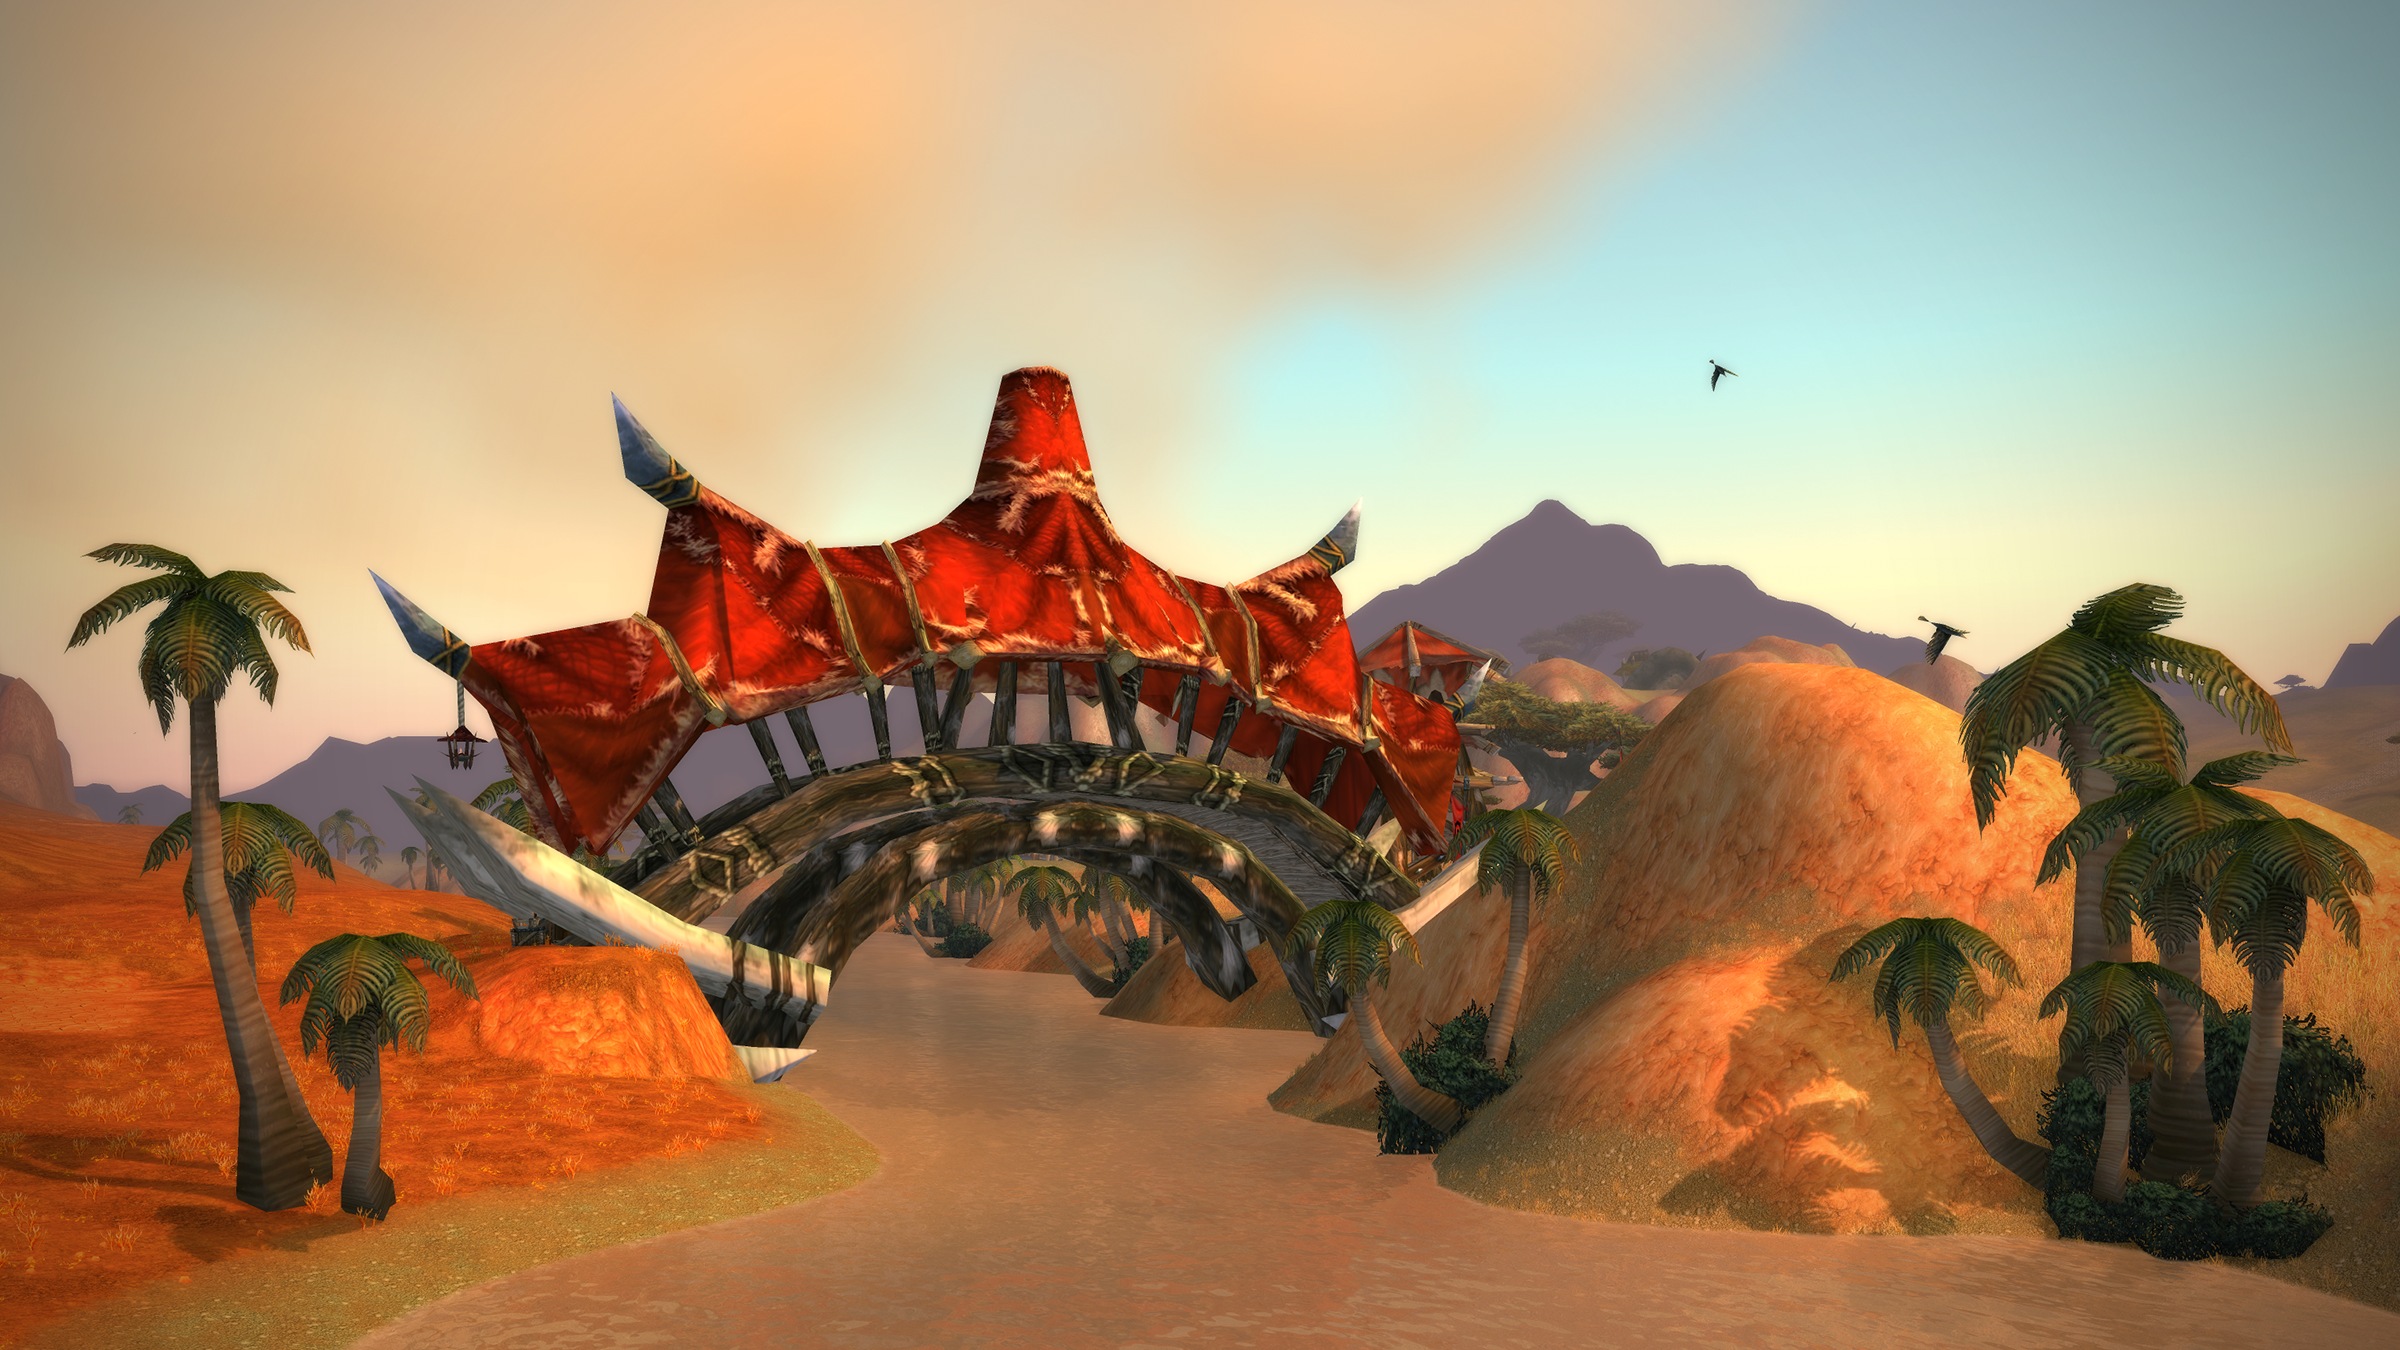 This Week in WoW - Classic Hardcore Self-Found Launches February 29th